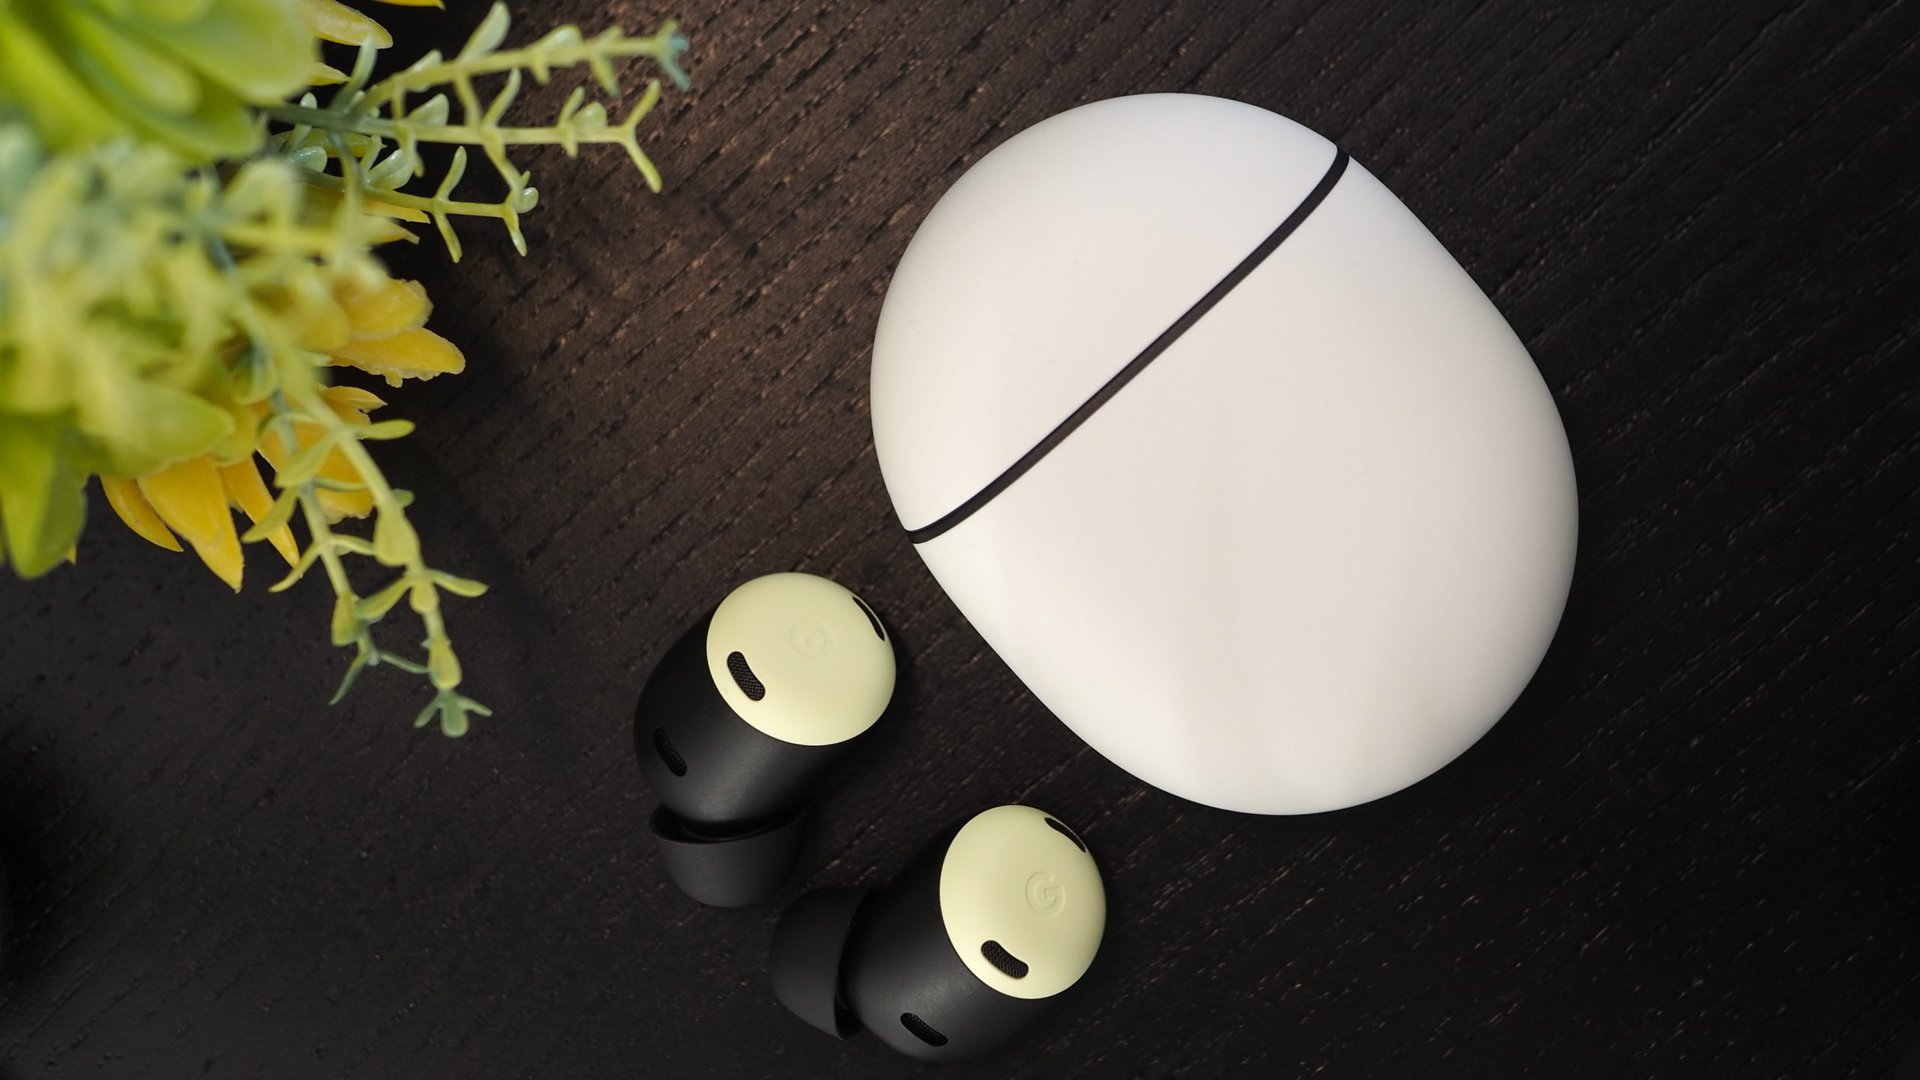 The Pixel Buds Pro outside ofo their case sittin on a dark wood table next a plastic plant.